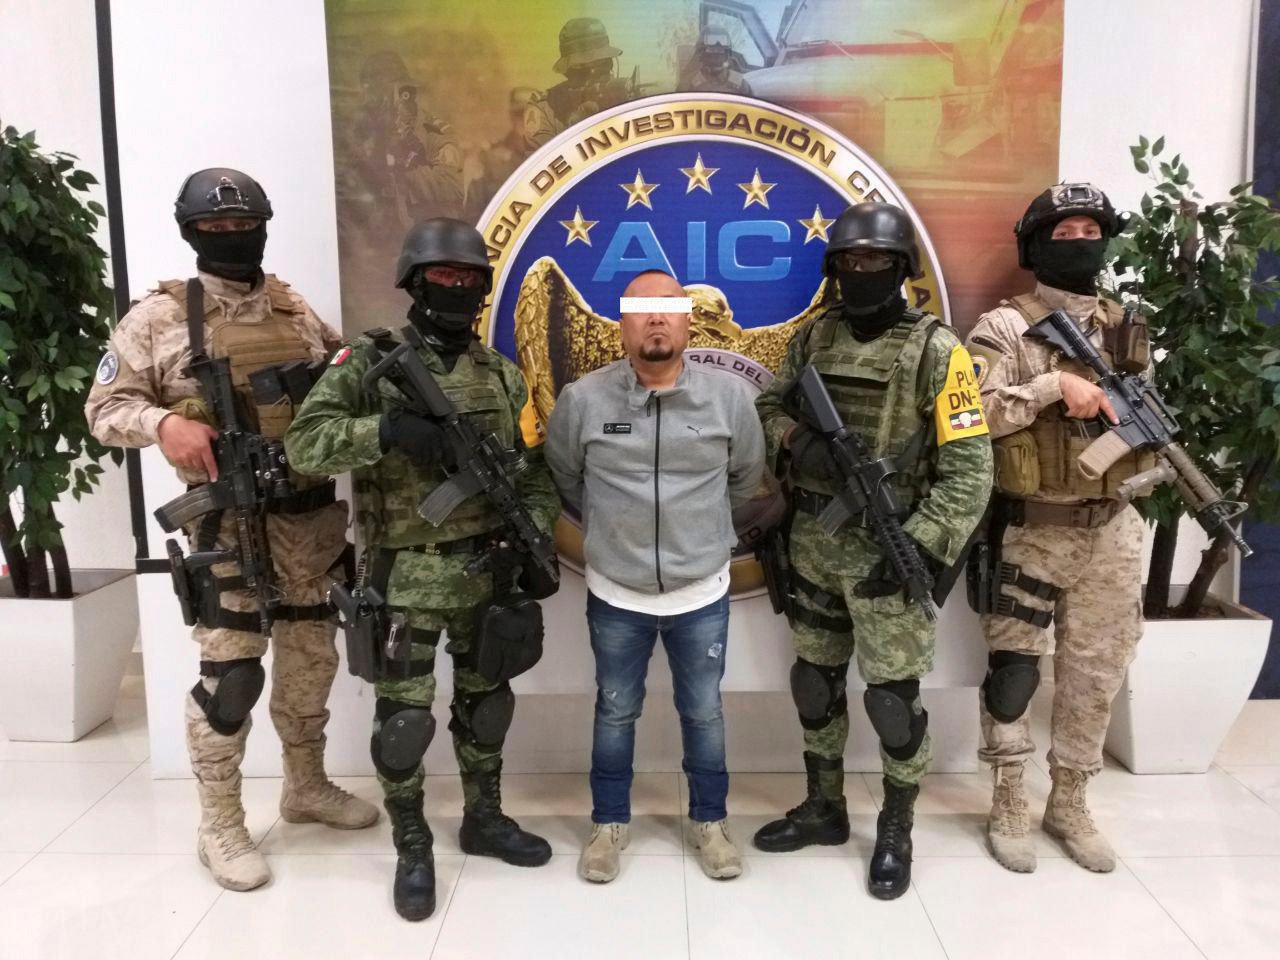 The arrest of a Mexican cartel leader reveals a complicated